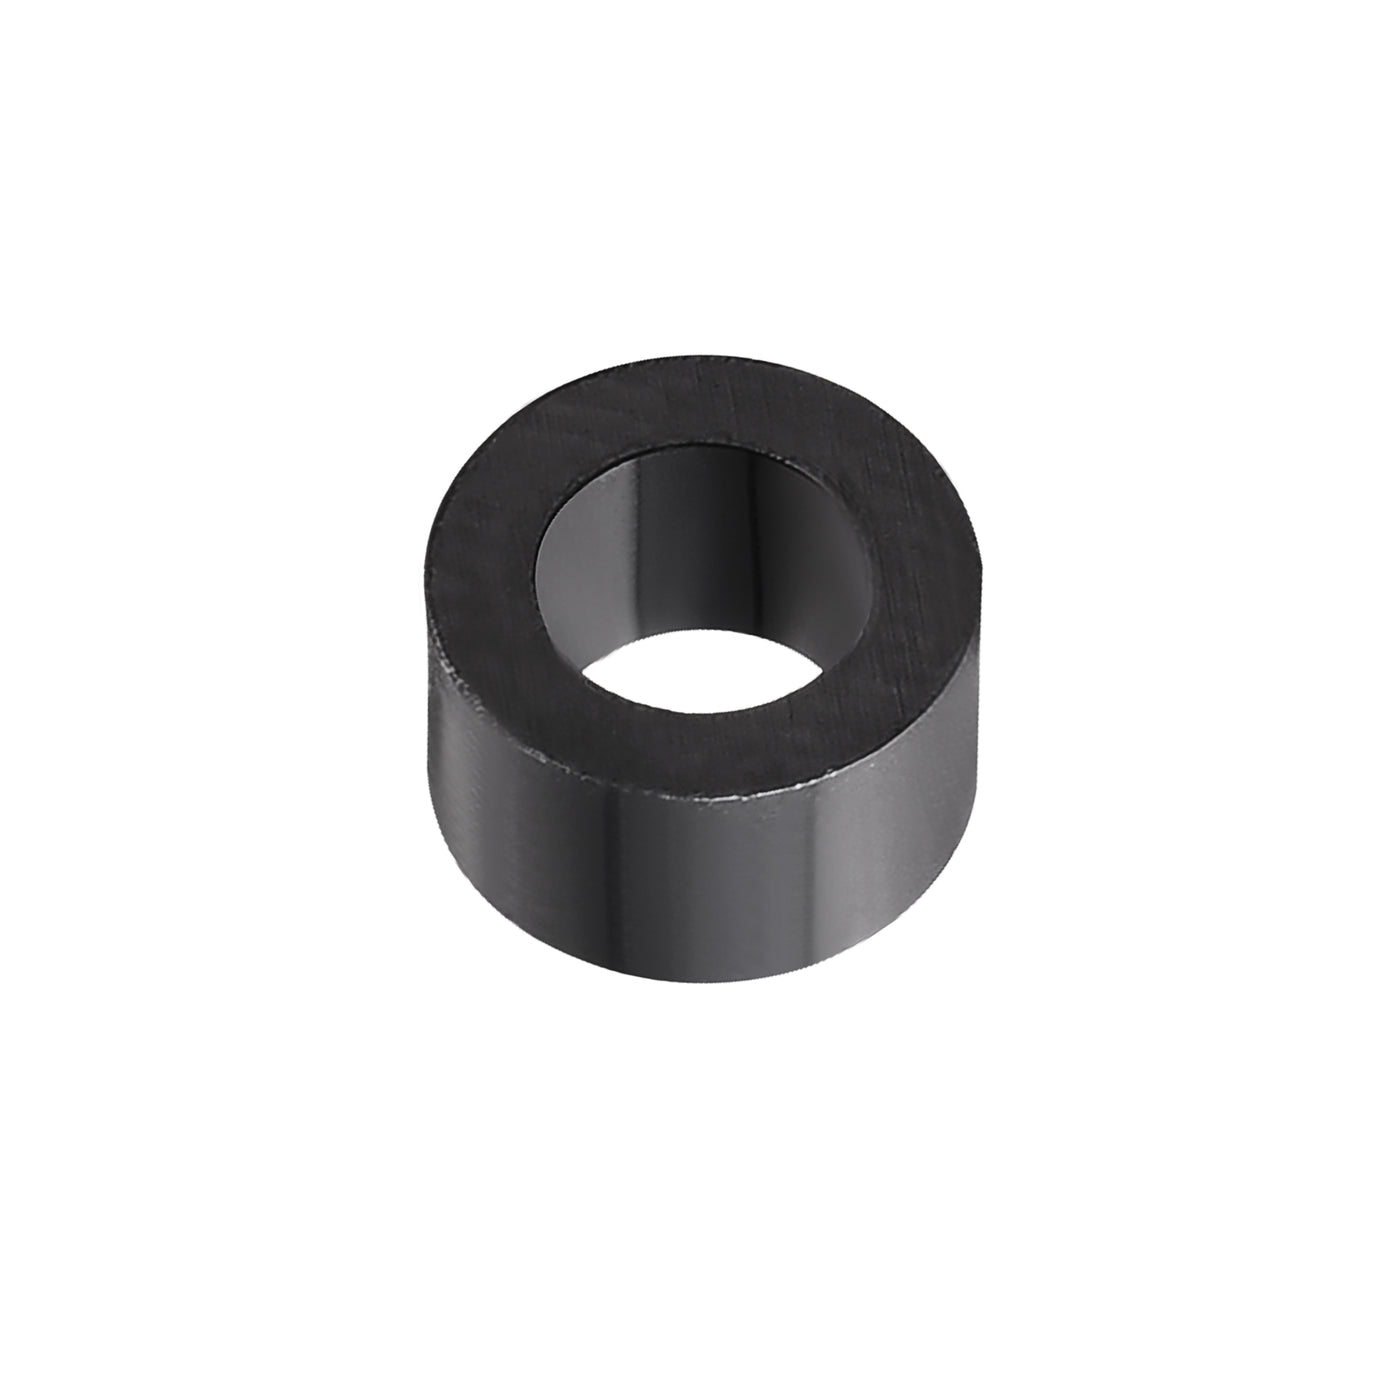 uxcell Uxcell Nylon Round Spacer Washer 4.2mmx7mmx4mm for M4 Screws Black 300Pcs